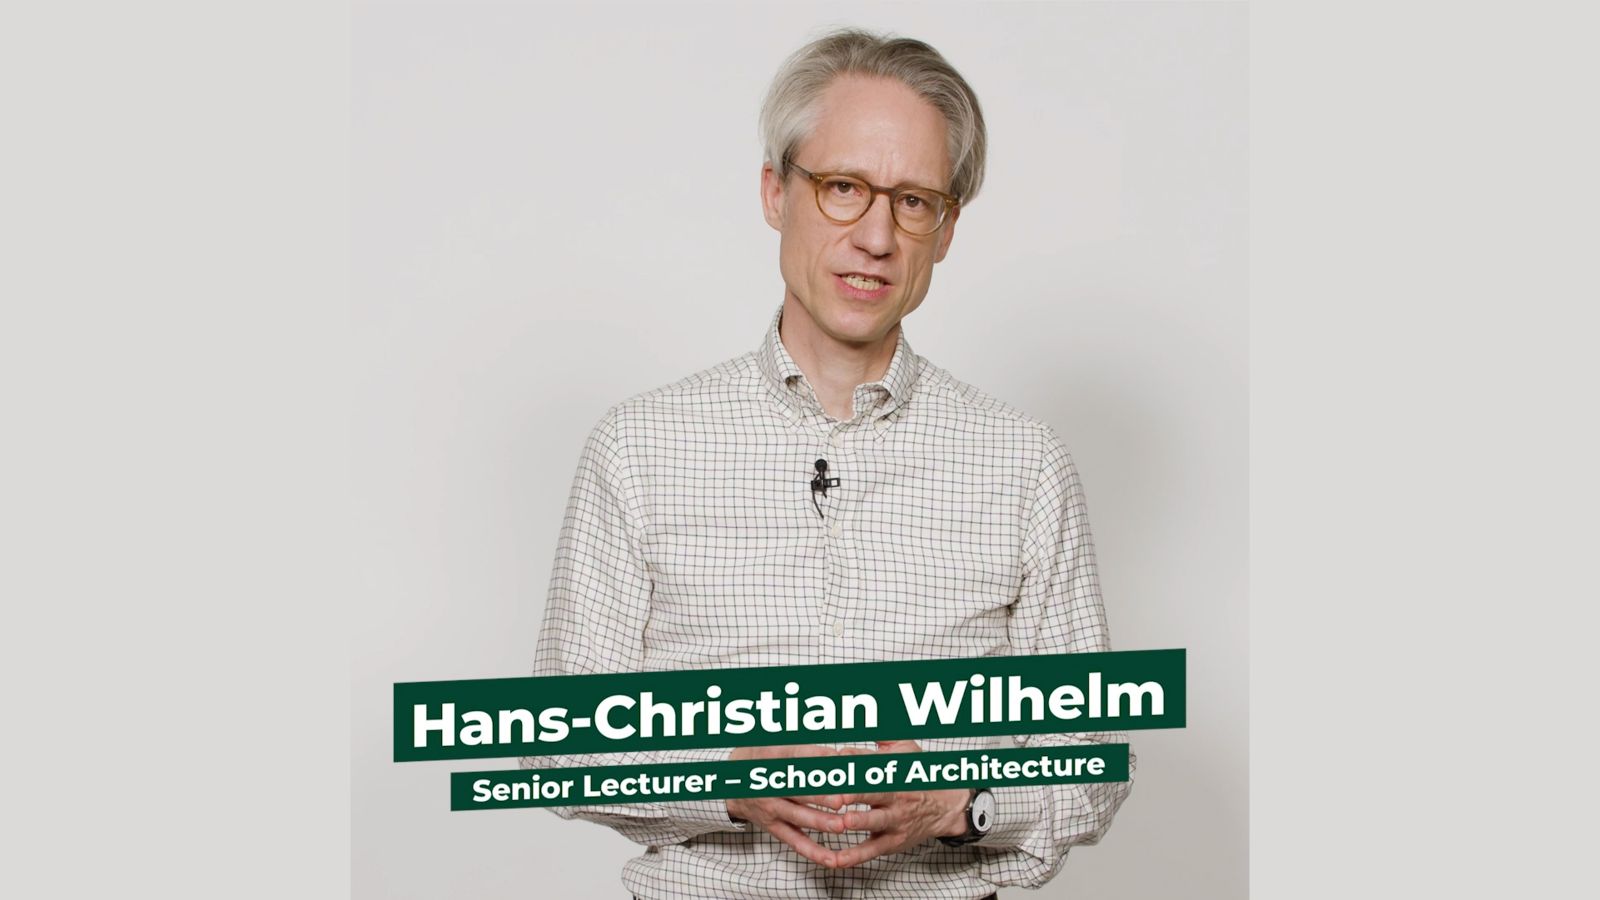 Senior Lecturer at the School of Architecture Hans-Christian Wilhelm stands facing the camera against a white backdrop.